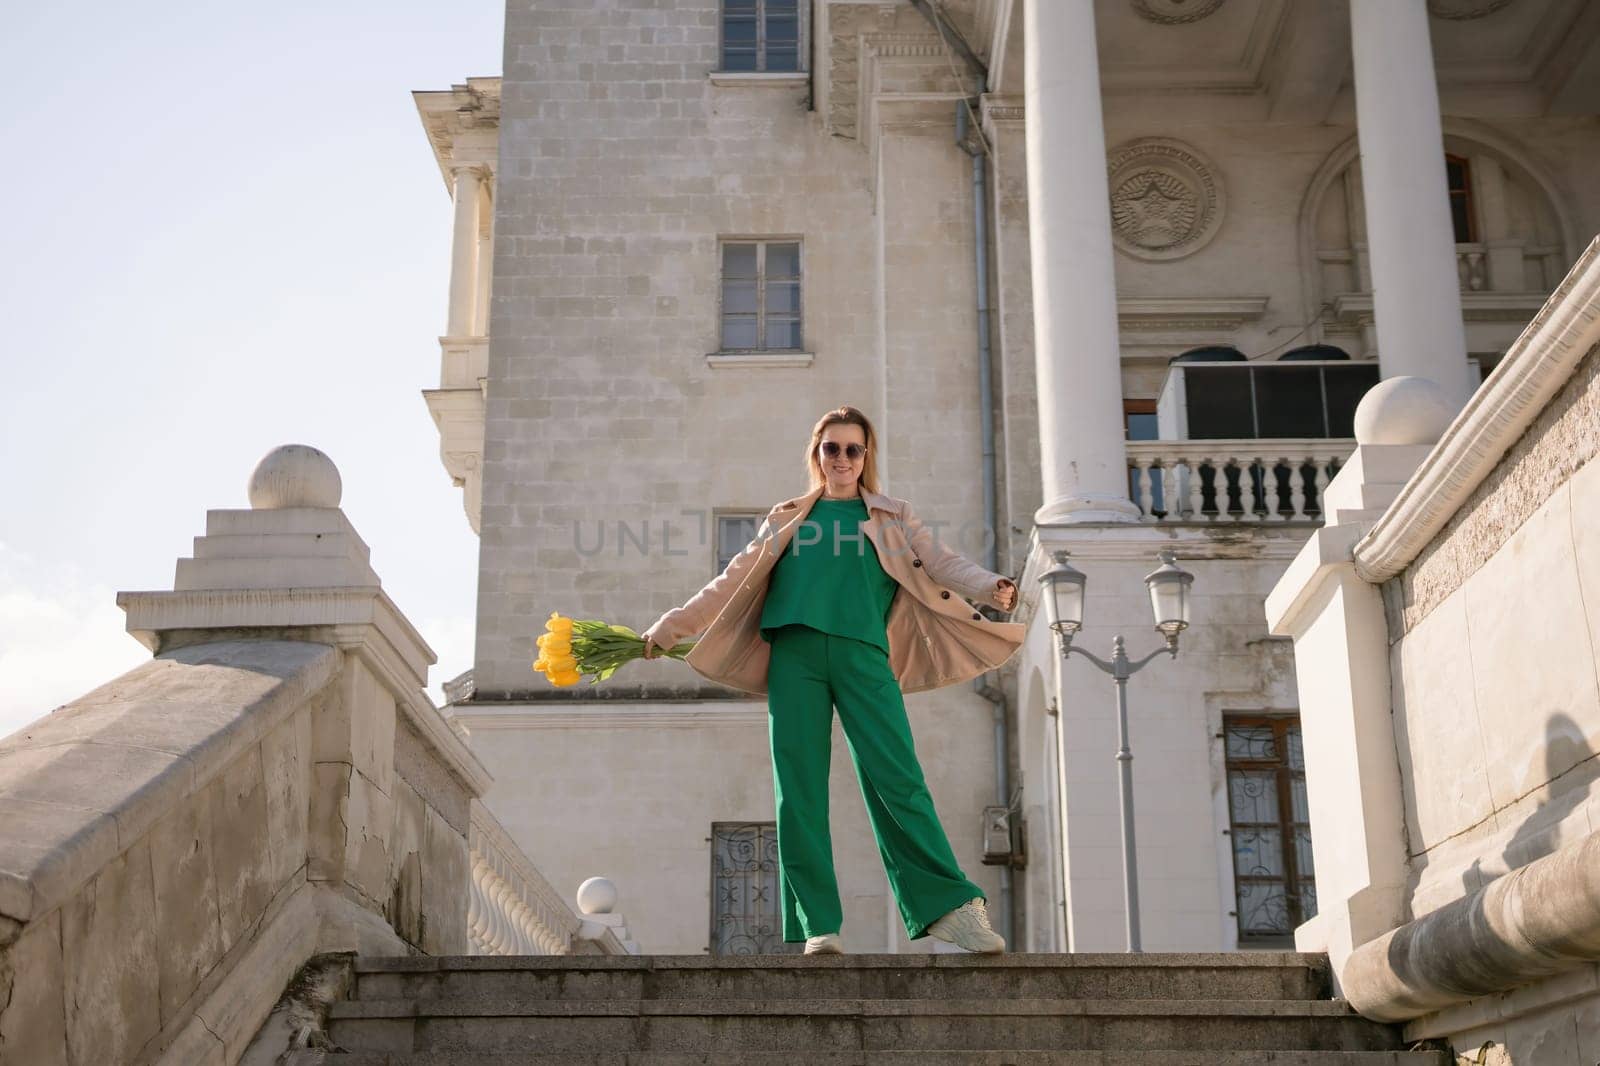 A woman in a green outfit stands on a set of stairs in front of a building. She is holding a bouquet of yellow flowers. The scene has a sense of elegance and sophistication. by Matiunina